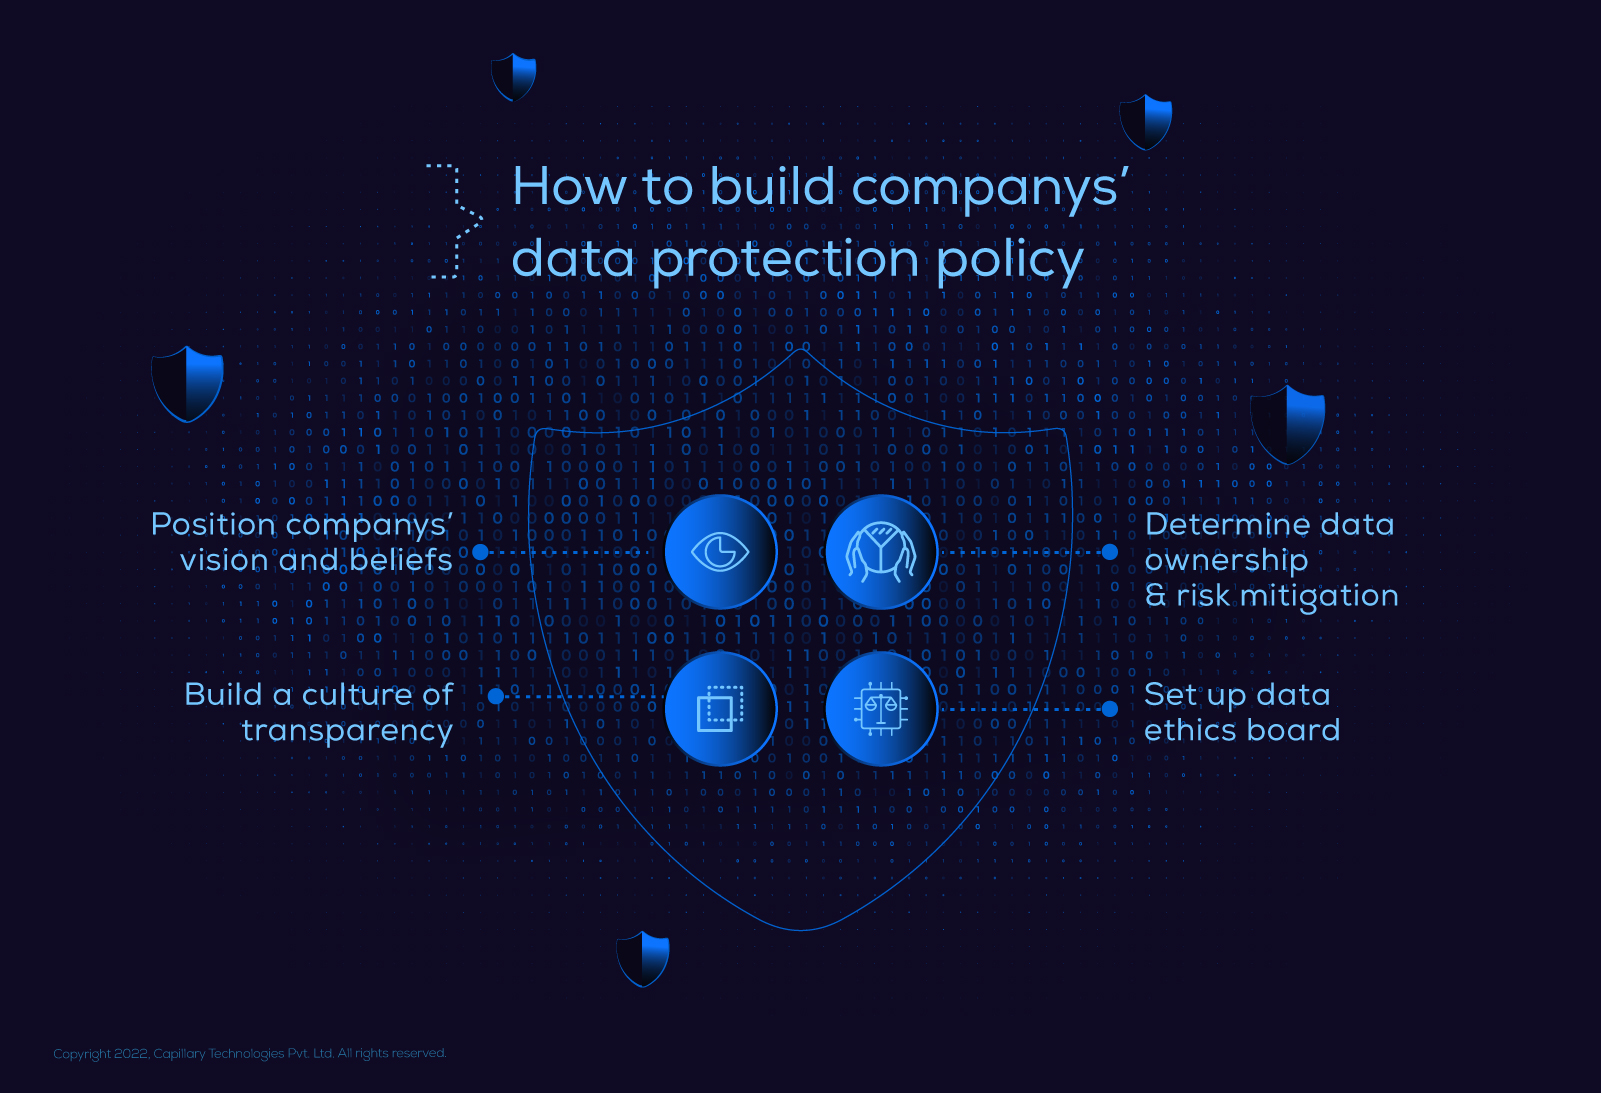 how to build companys' data protection policy